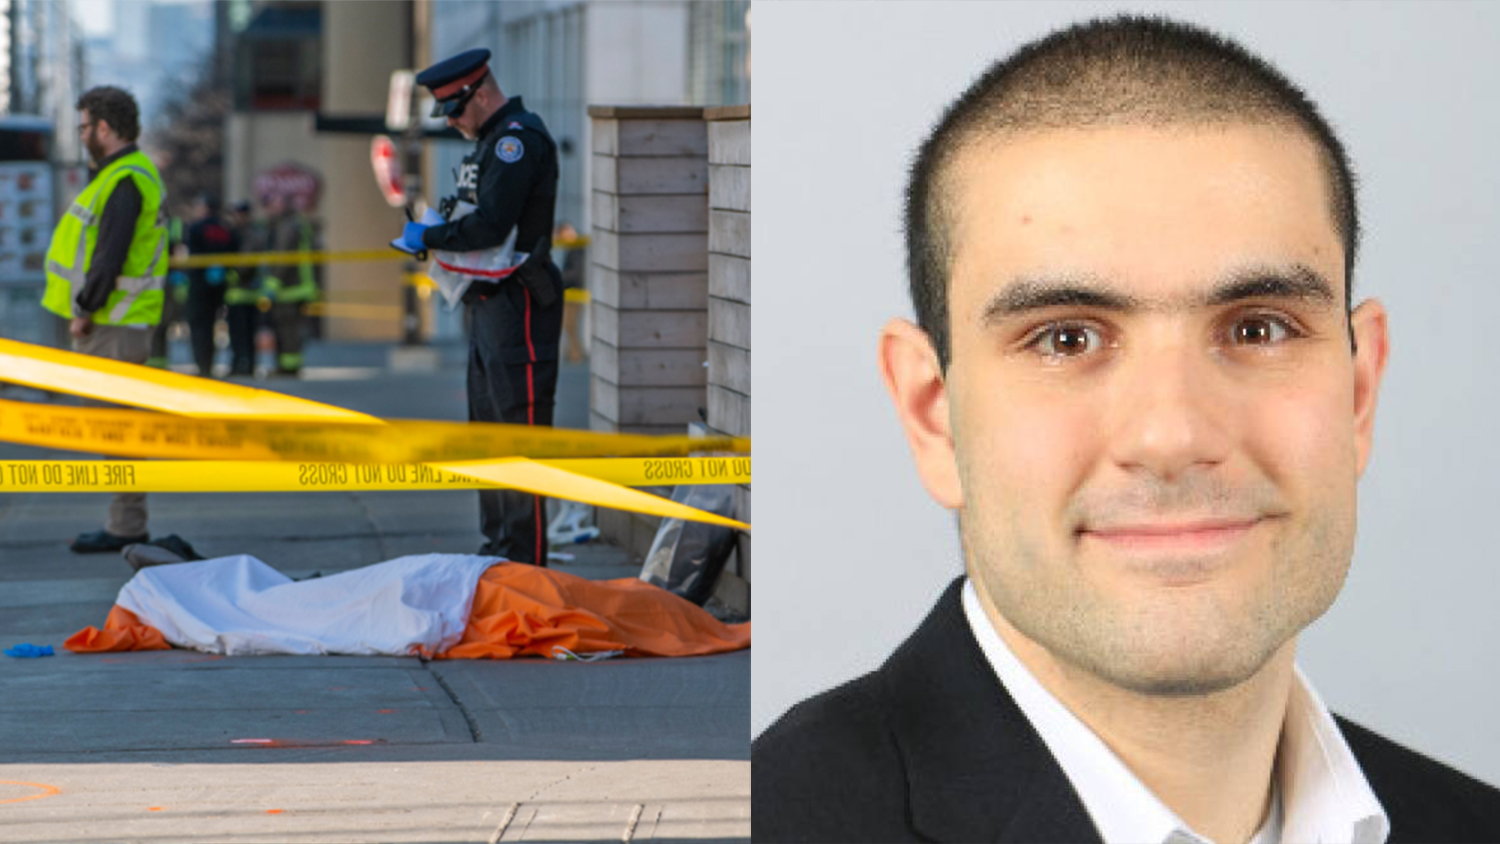 Everything We Know About Alek Minassian The Alleged Toronto Van Attacker